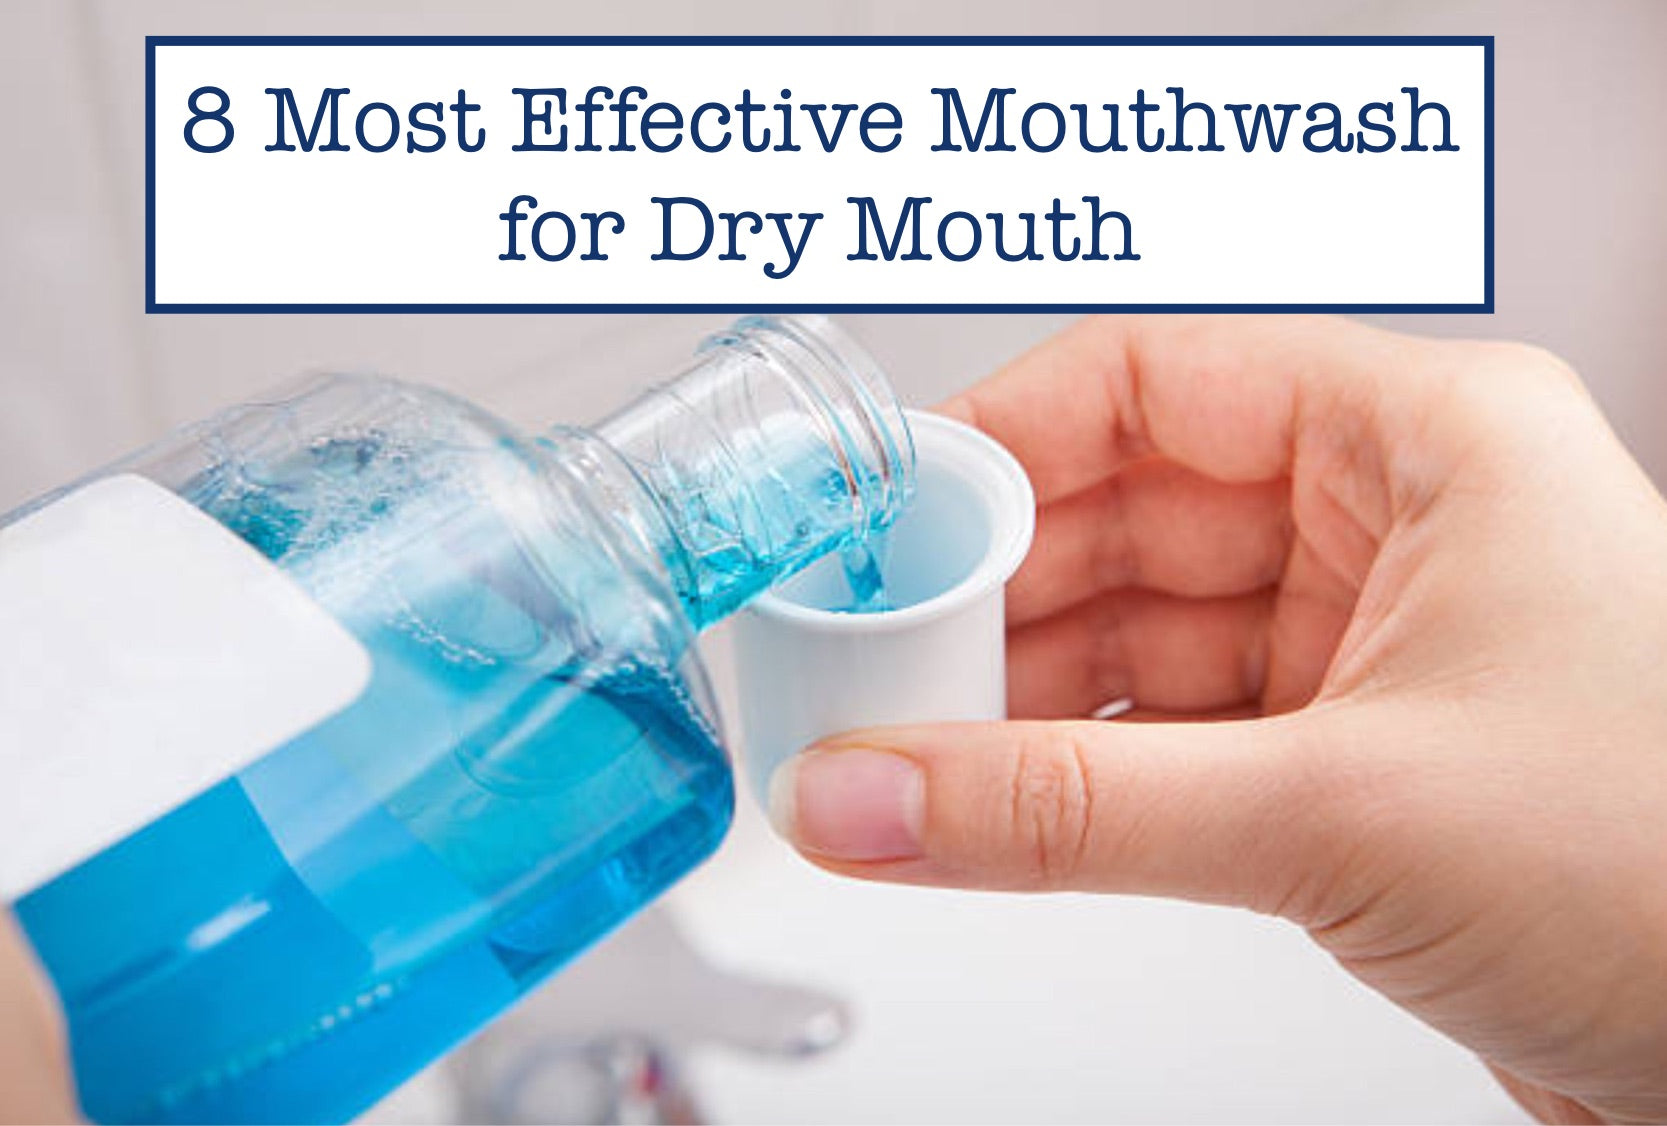 8 Most Effective Mouthwash for Dry Mouth